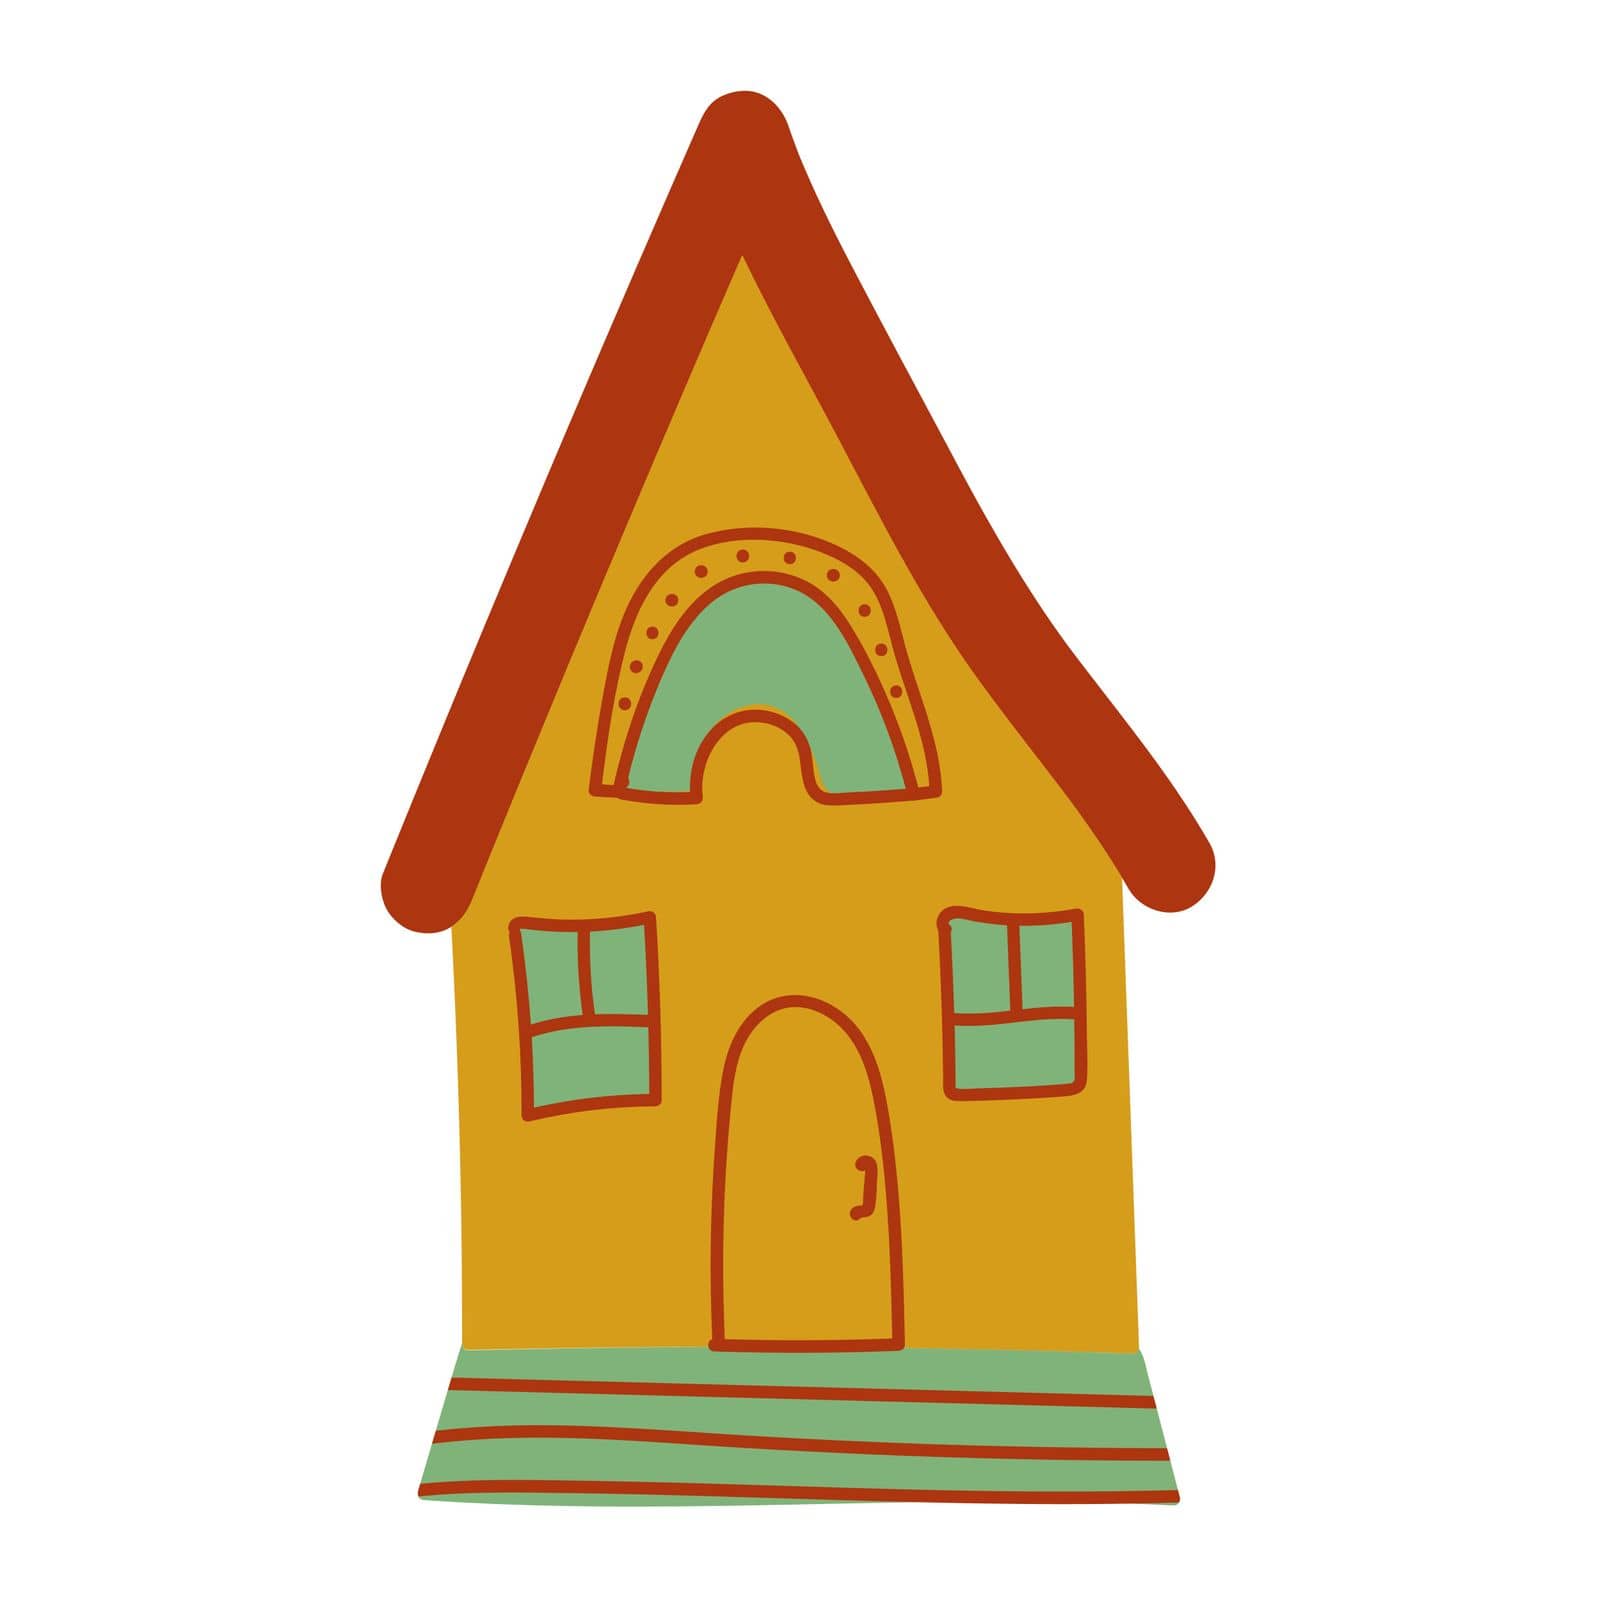 Childish house in simple hand drawn style by KatyaBahr